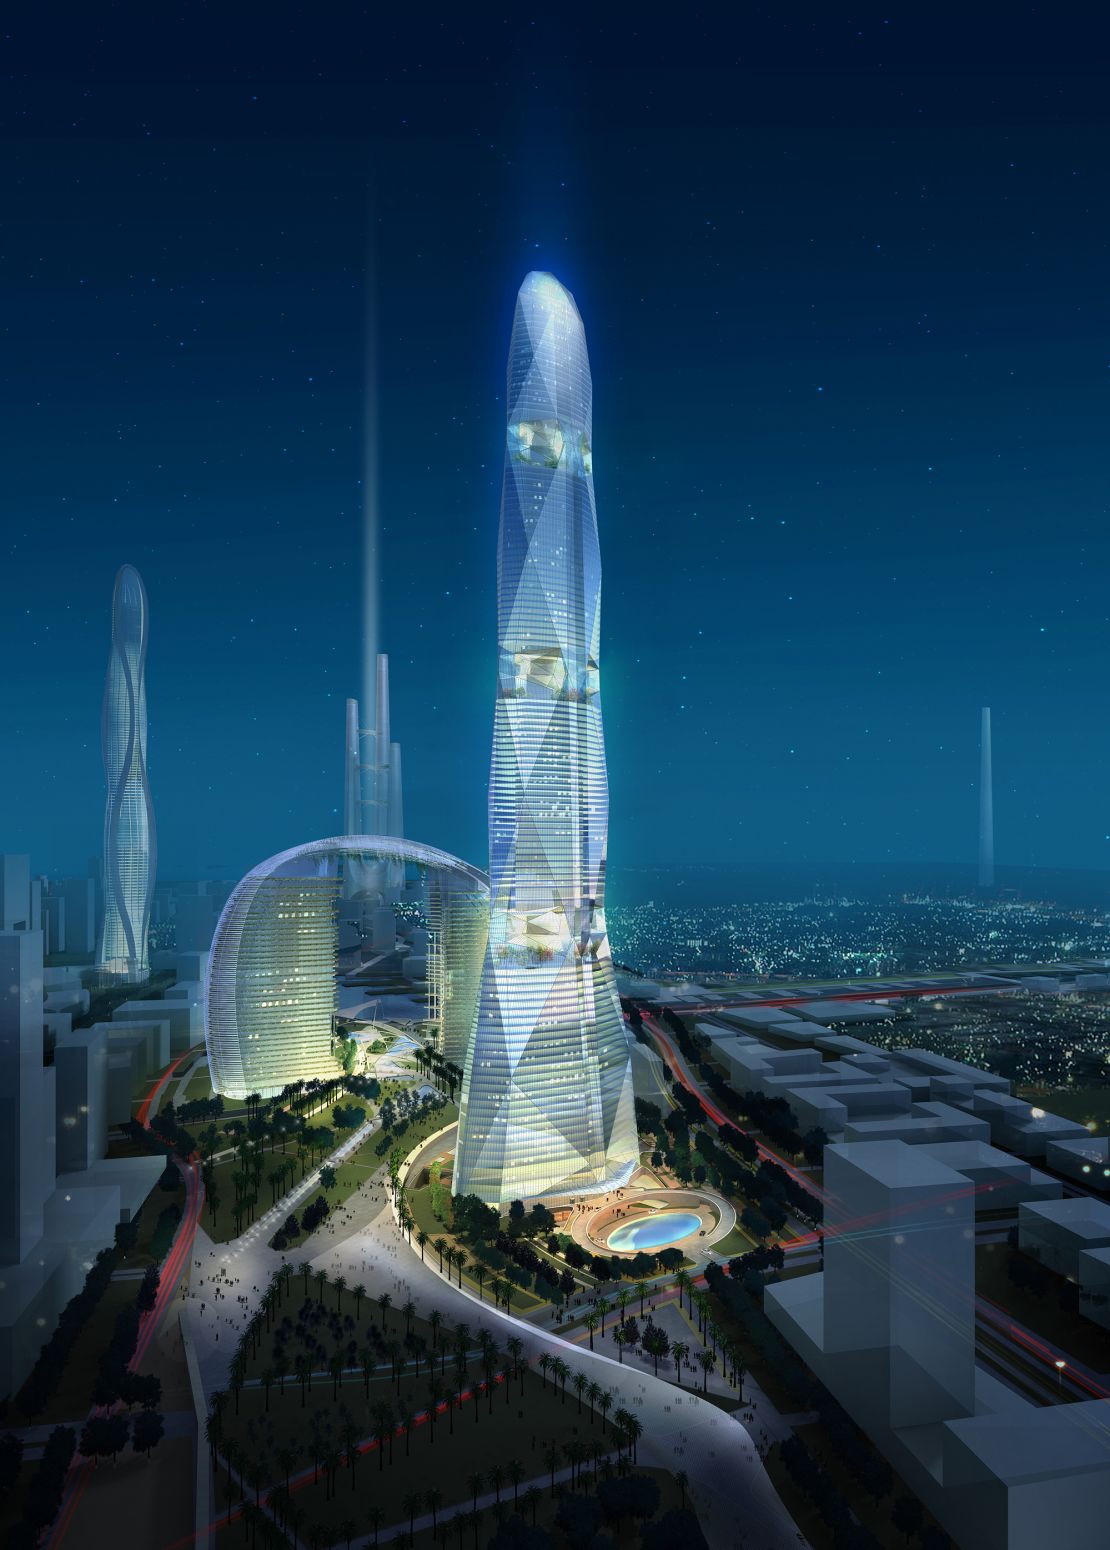 A rendering of Meraas Tower, a design by AS+GG from 2008. The proposed skyscraper was to be 526 meters tall.